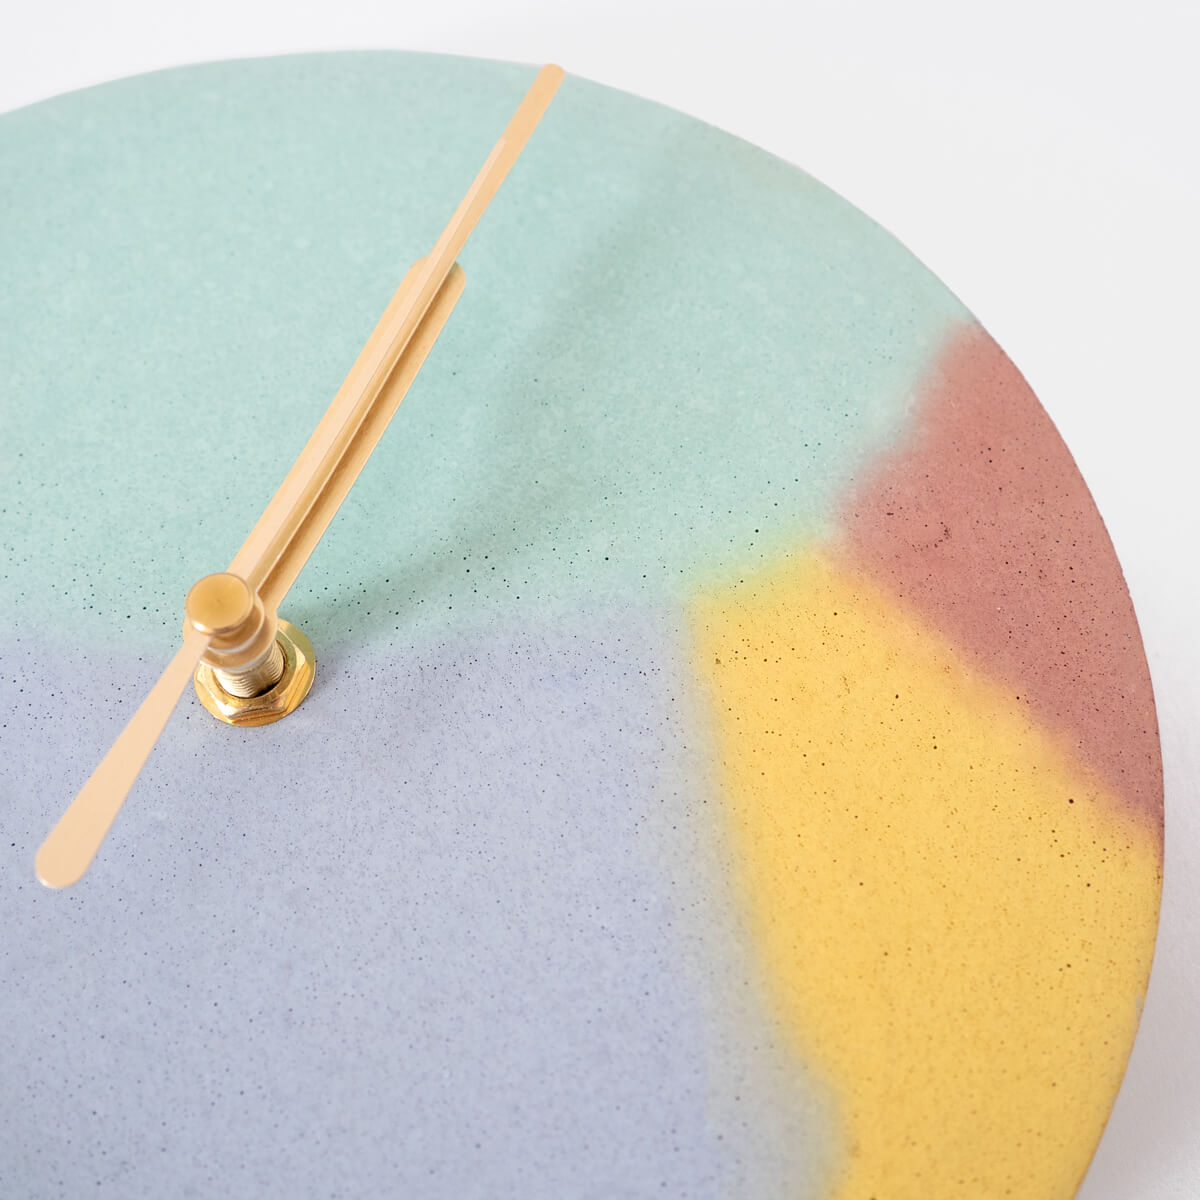 Close up to show the smooth texture and colours of the clock face.